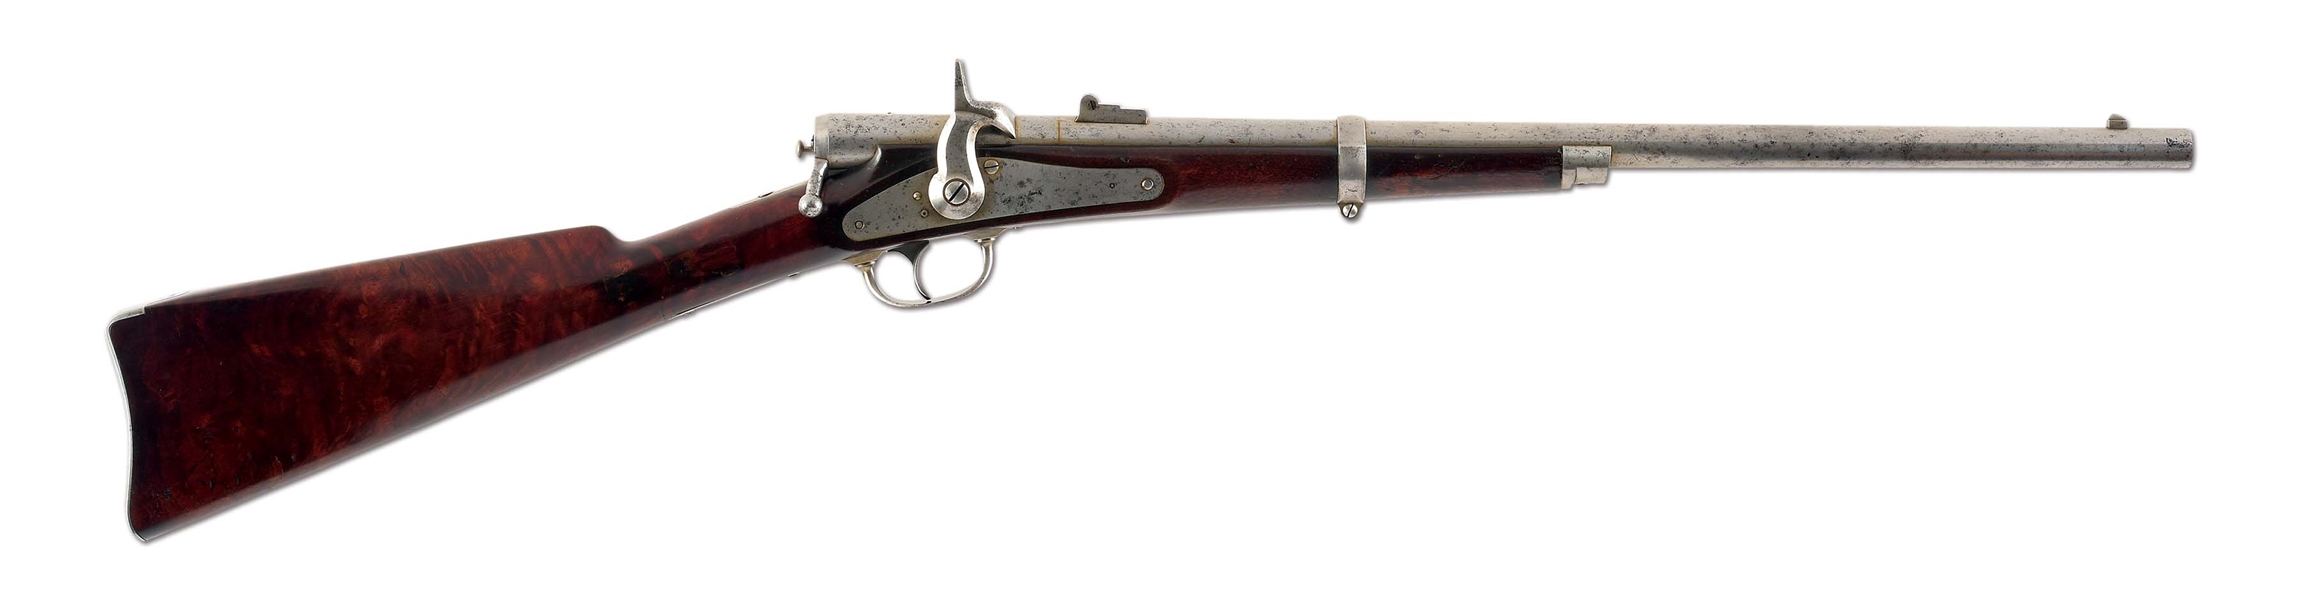 (A) ATTRIBUTED TO DUSTIN F. MELLEN, NH, PROTOTYPE BOLT ACTION CIVIL WAR SADDLE RING CARBINE.